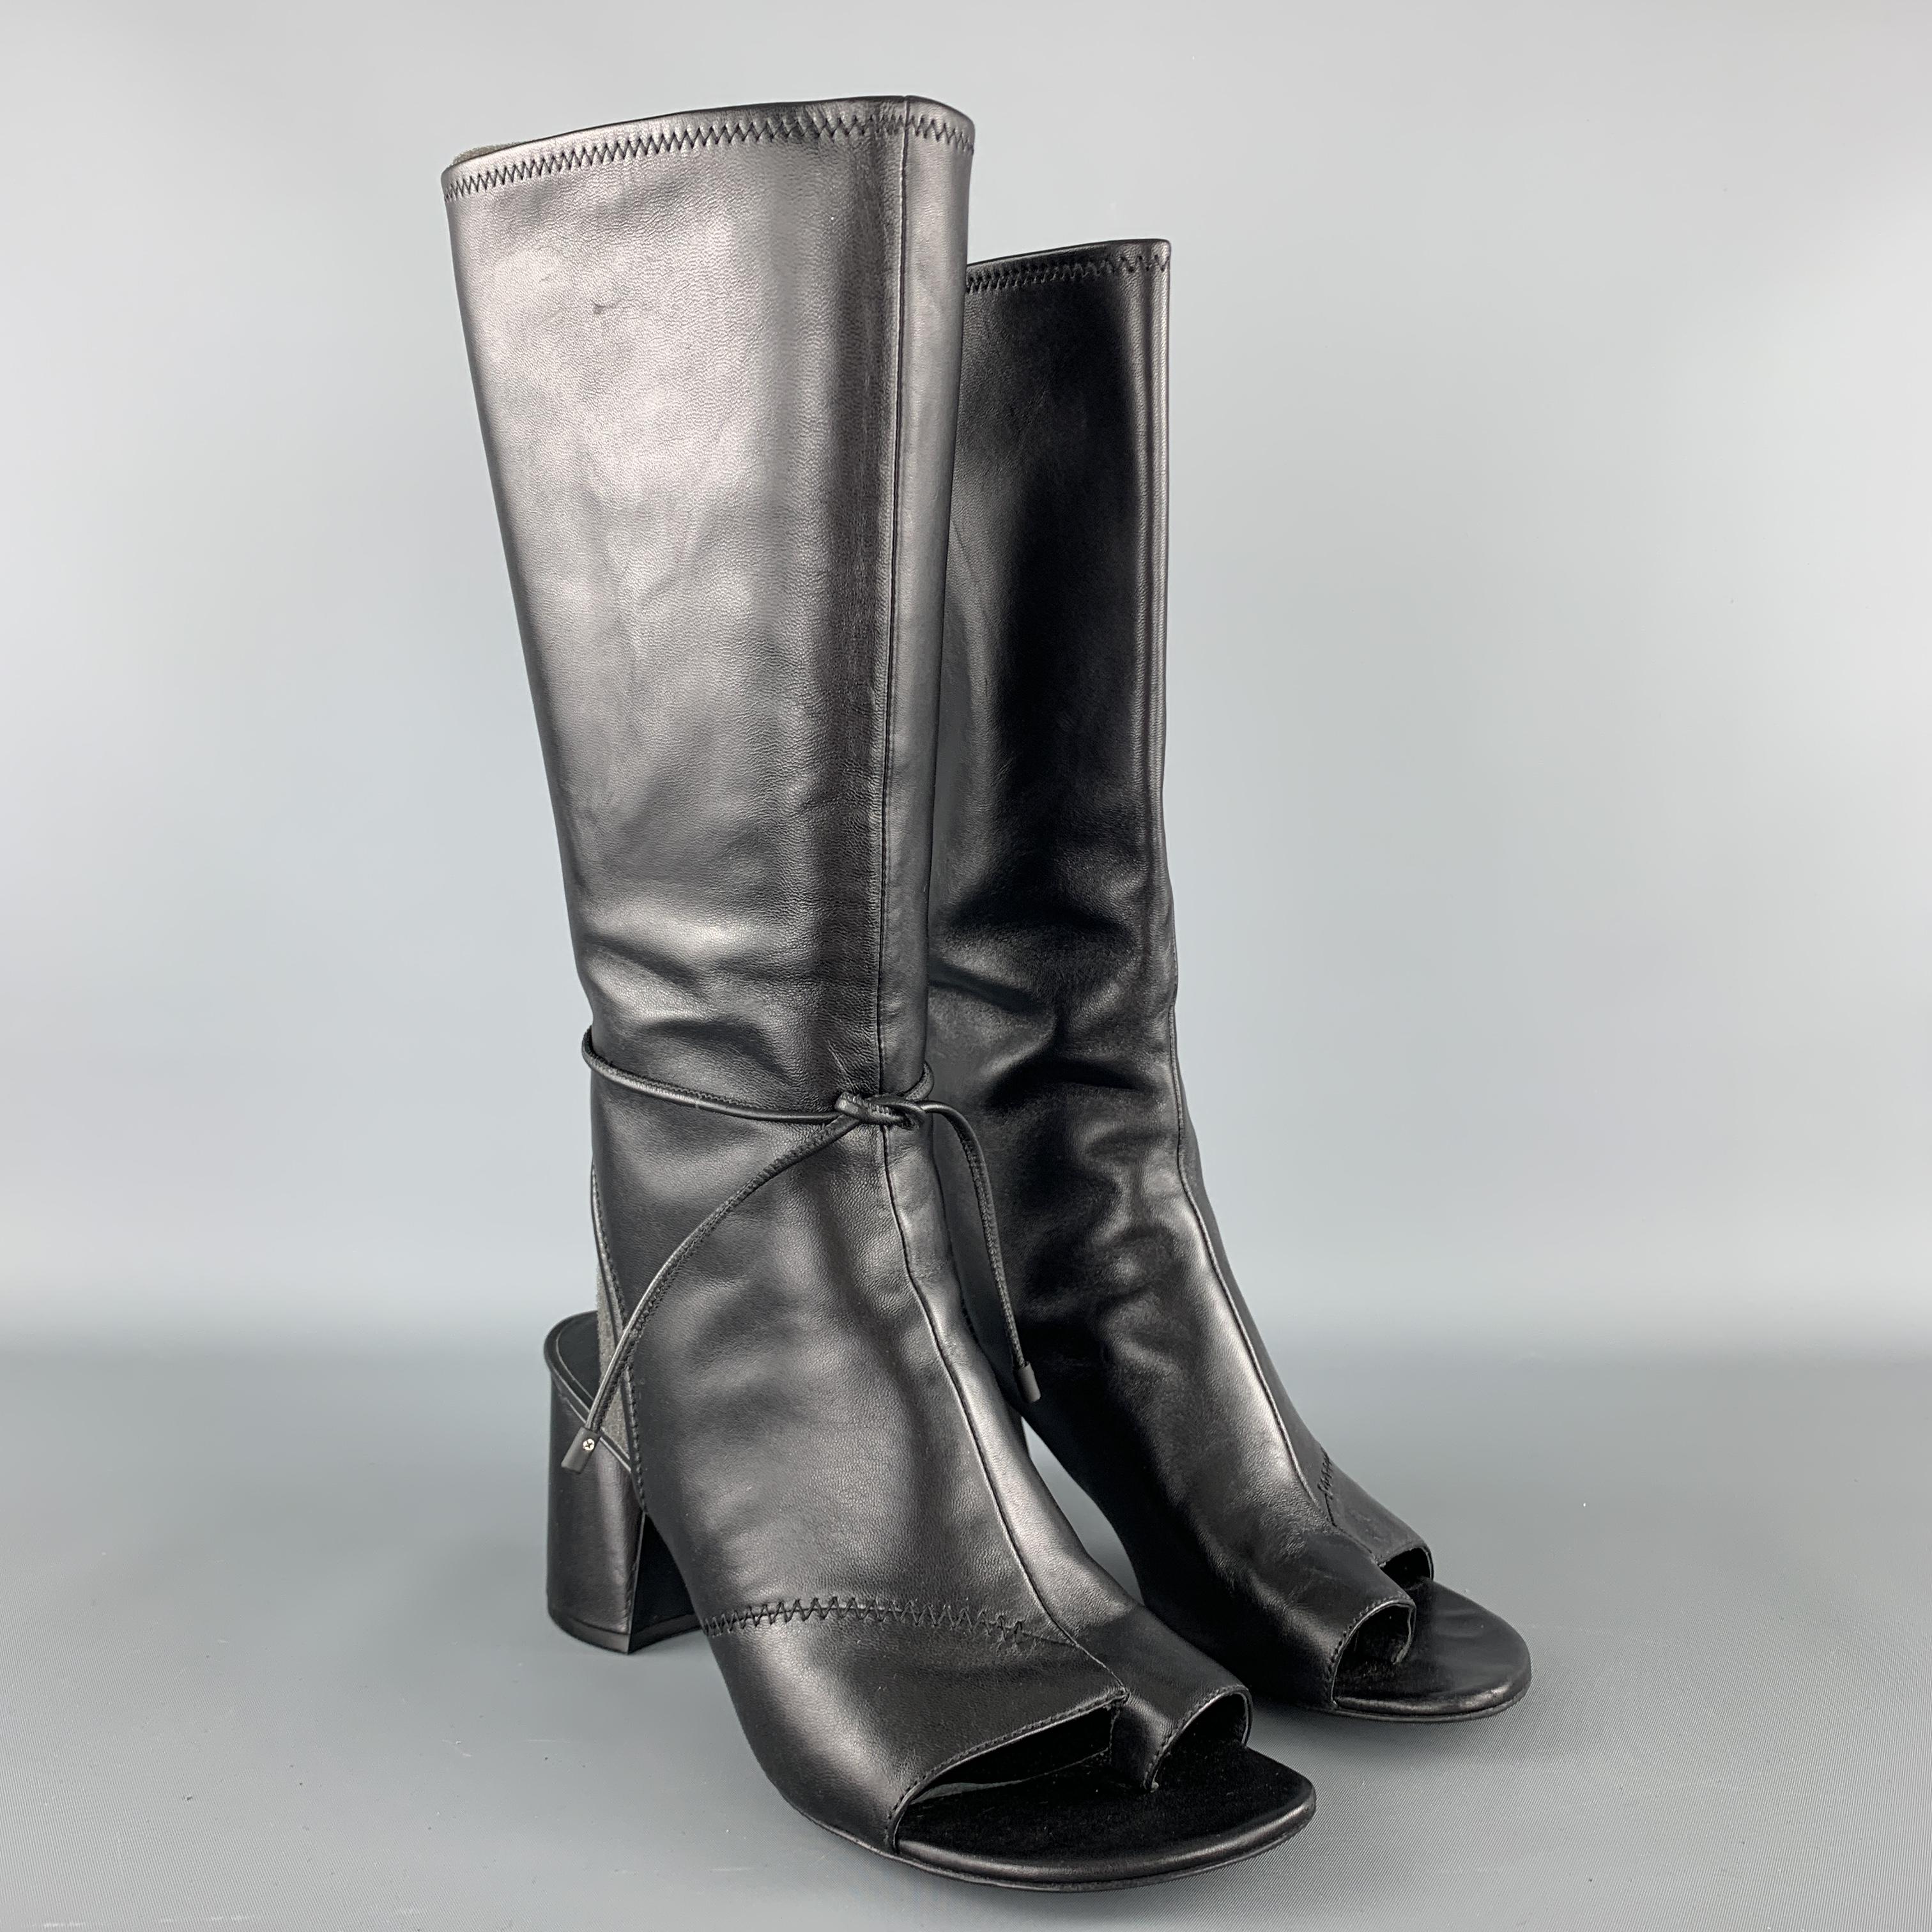 3.1 PHILLIP LIM sandal boots come in smooth black leather with an open toe and heel , tall shaft with tie strap, and chunky heel. With box. 

Excellent Pre-Owned Condition.
Marked: IT 39

Heel: 3 in.
Length: 12.5 in.